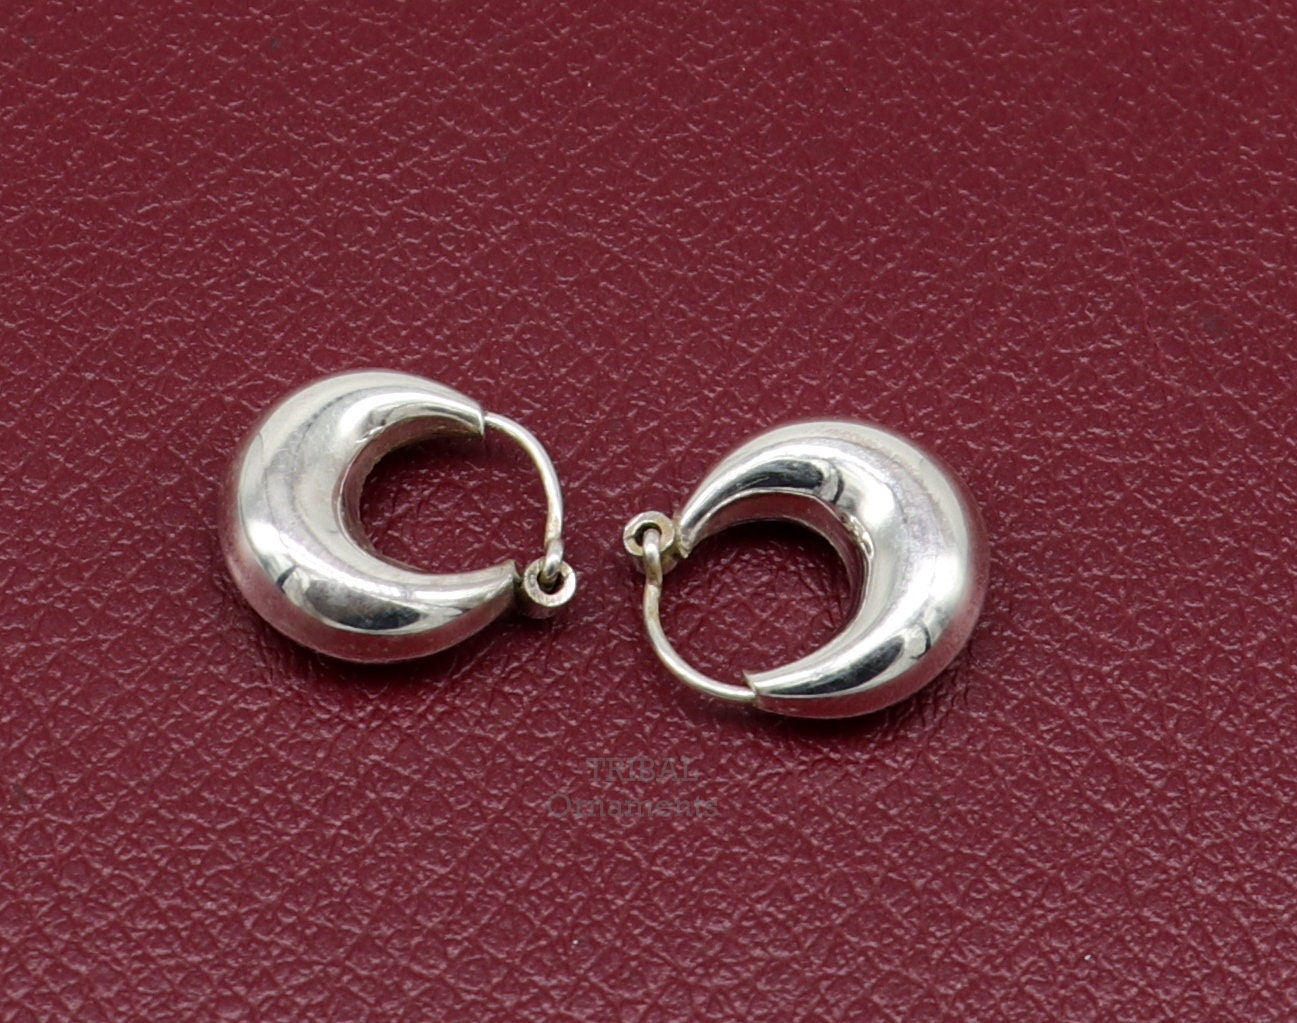 Vintage Design 925 sterling silver fabulous hoops earring, tribal kundal earring from Rajasthan India, best gifting unisex jewelry ear1246 - TRIBAL ORNAMENTS